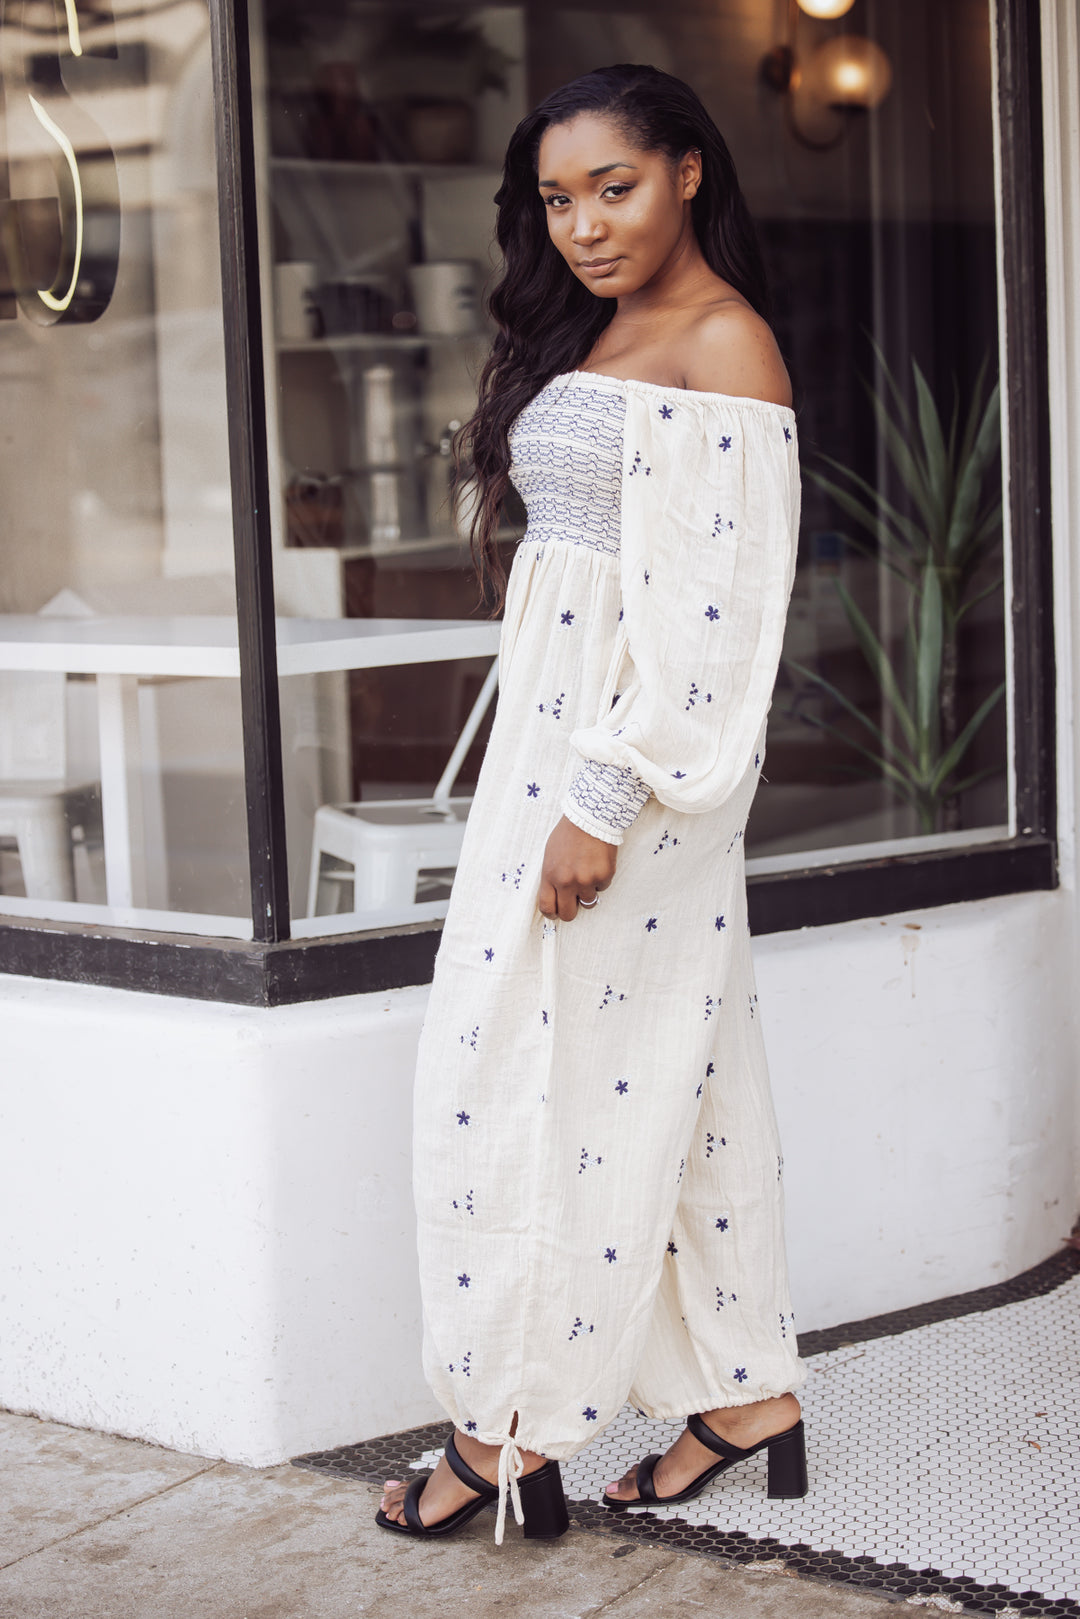 FREE PEOPLE - DAHLIA JUMPSUIT - WASHED OUT